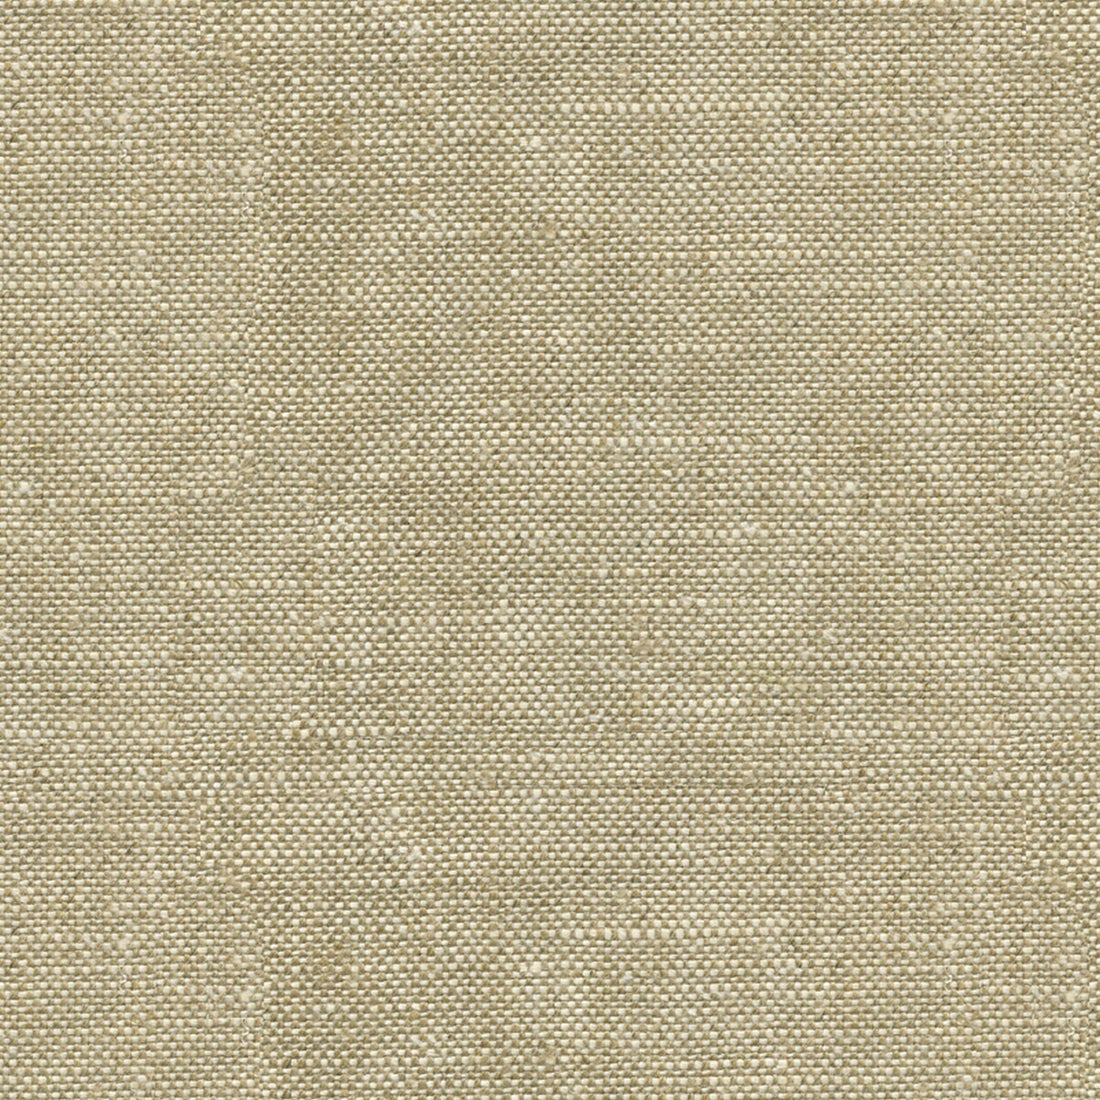 Newport fabric in buff color - pattern ED85116.118.0 - by Threads in the Threads Spring collection